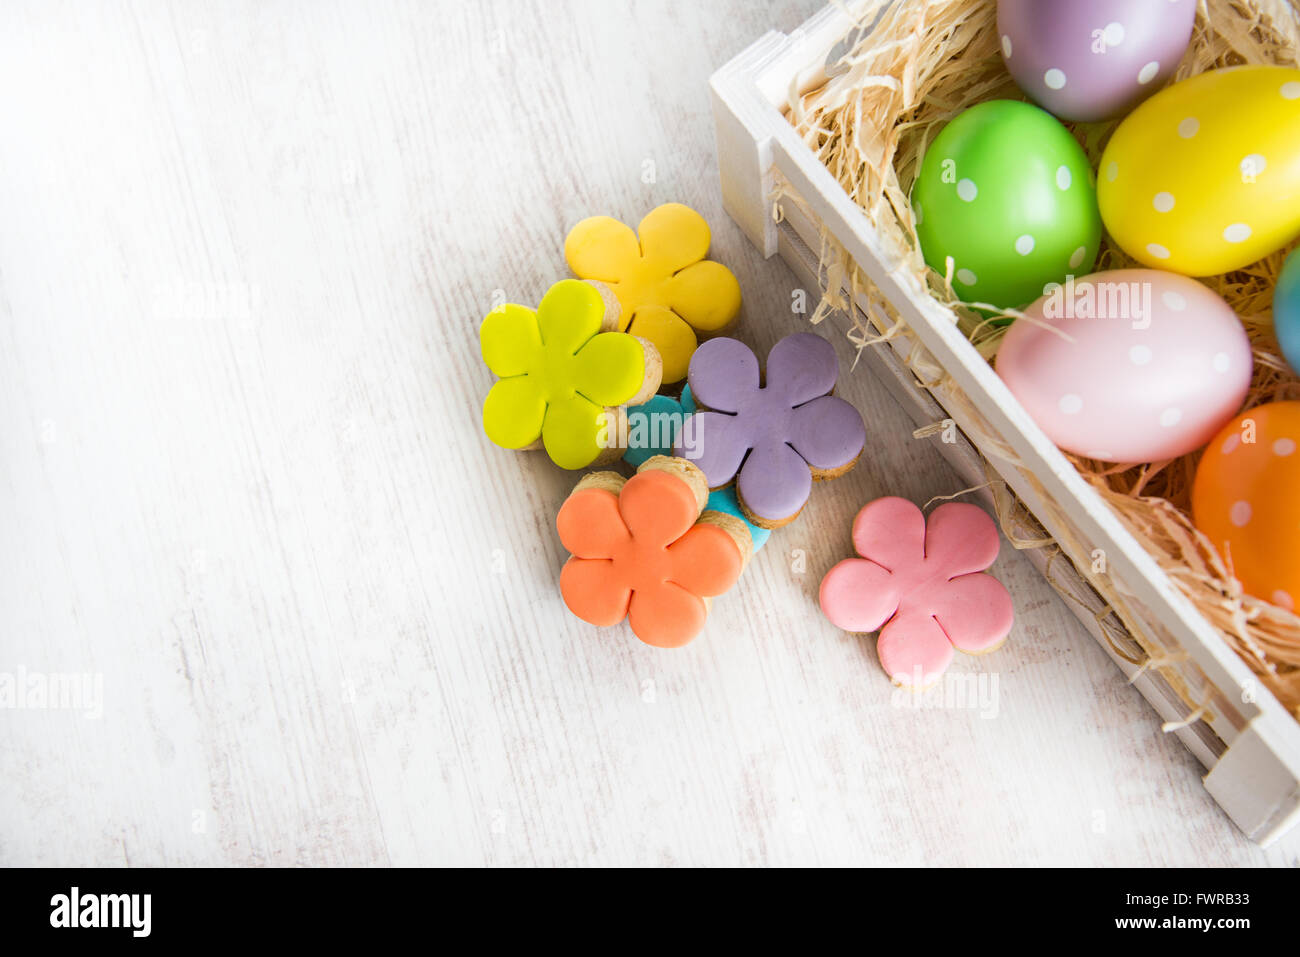 Wooden basket filled with easter eggs and homemade fondant covered flower cut cookies on a white wooden background Stock Photo